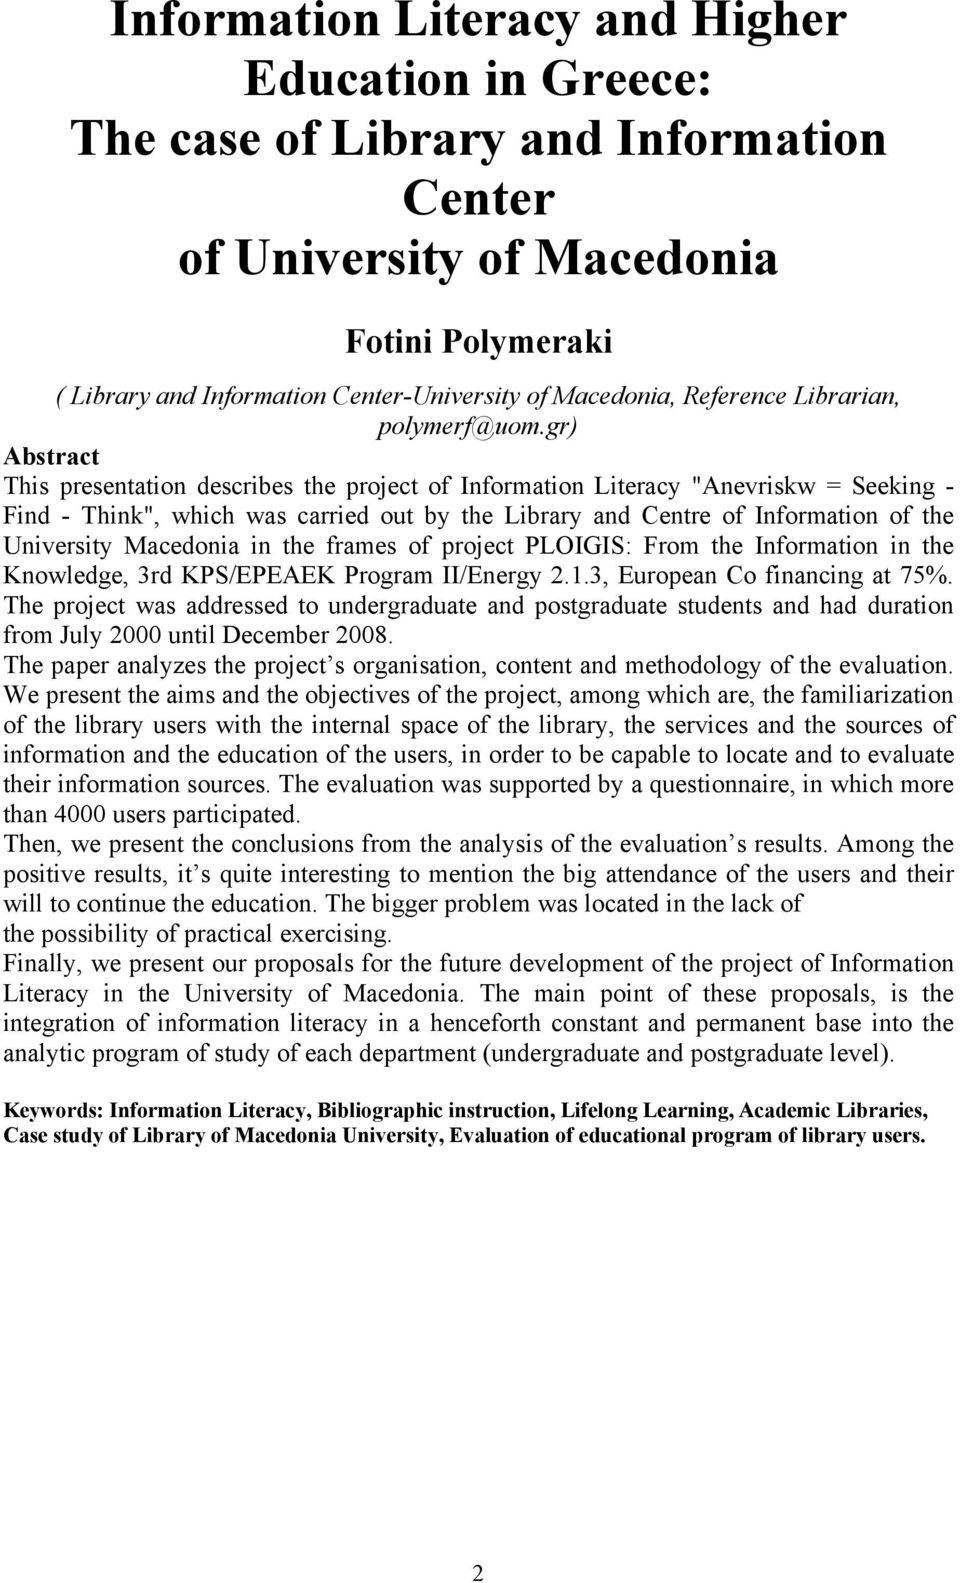 gr) Abstract This presentation describes the project of Information Literacy "Anevriskw = Seeking - Find - Think", which was carried out by the Library and Centre of Information of the University